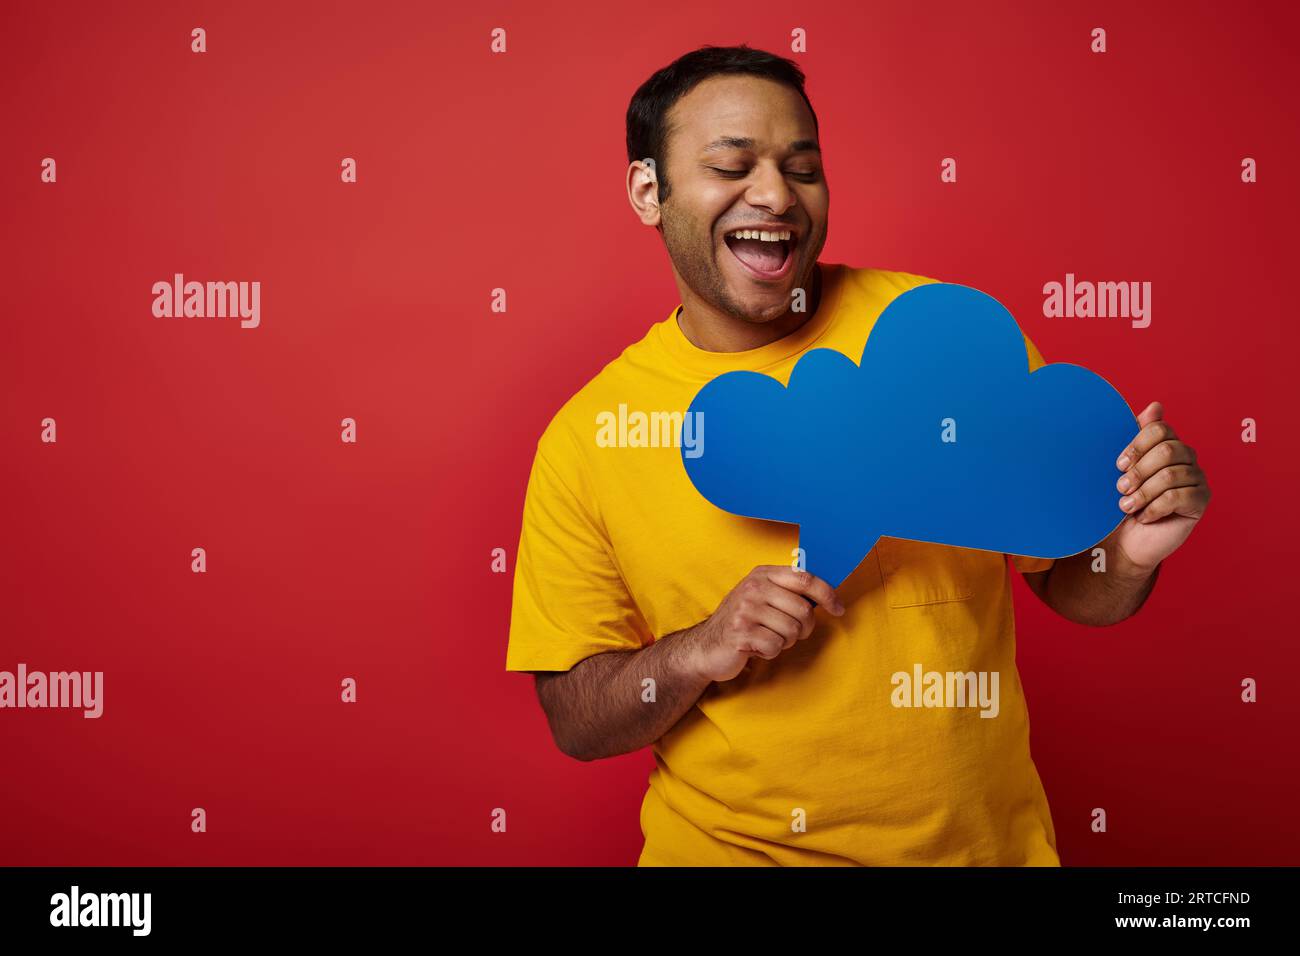 excited man in yellow t-shirt looking at blank thought bubble on red backdrop, cheerful face Stock Photo